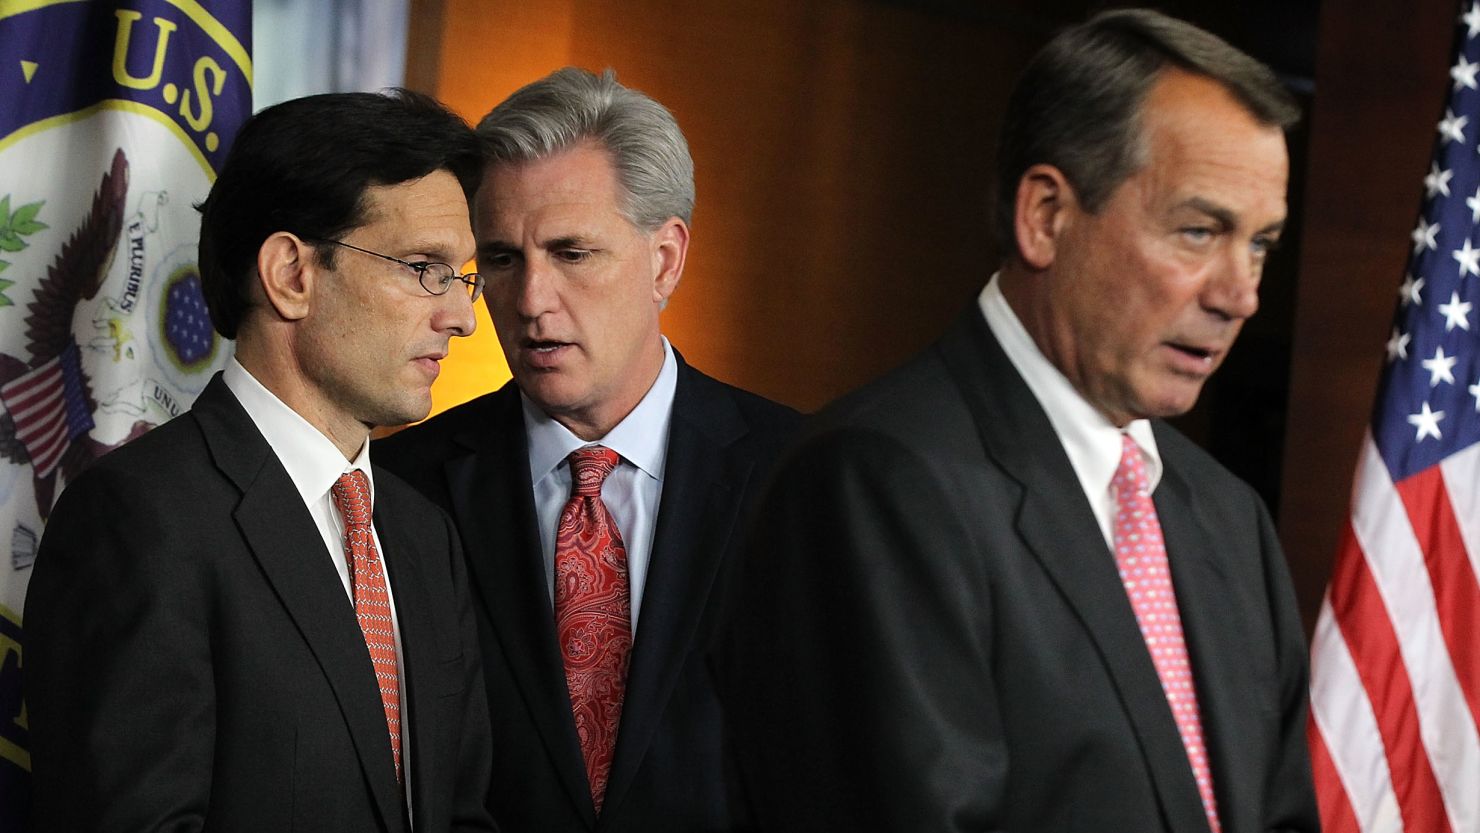 House Republicans Eric Cantor, Kevin McCarthy and John Boehner released a statement on the contentious payroll issue.